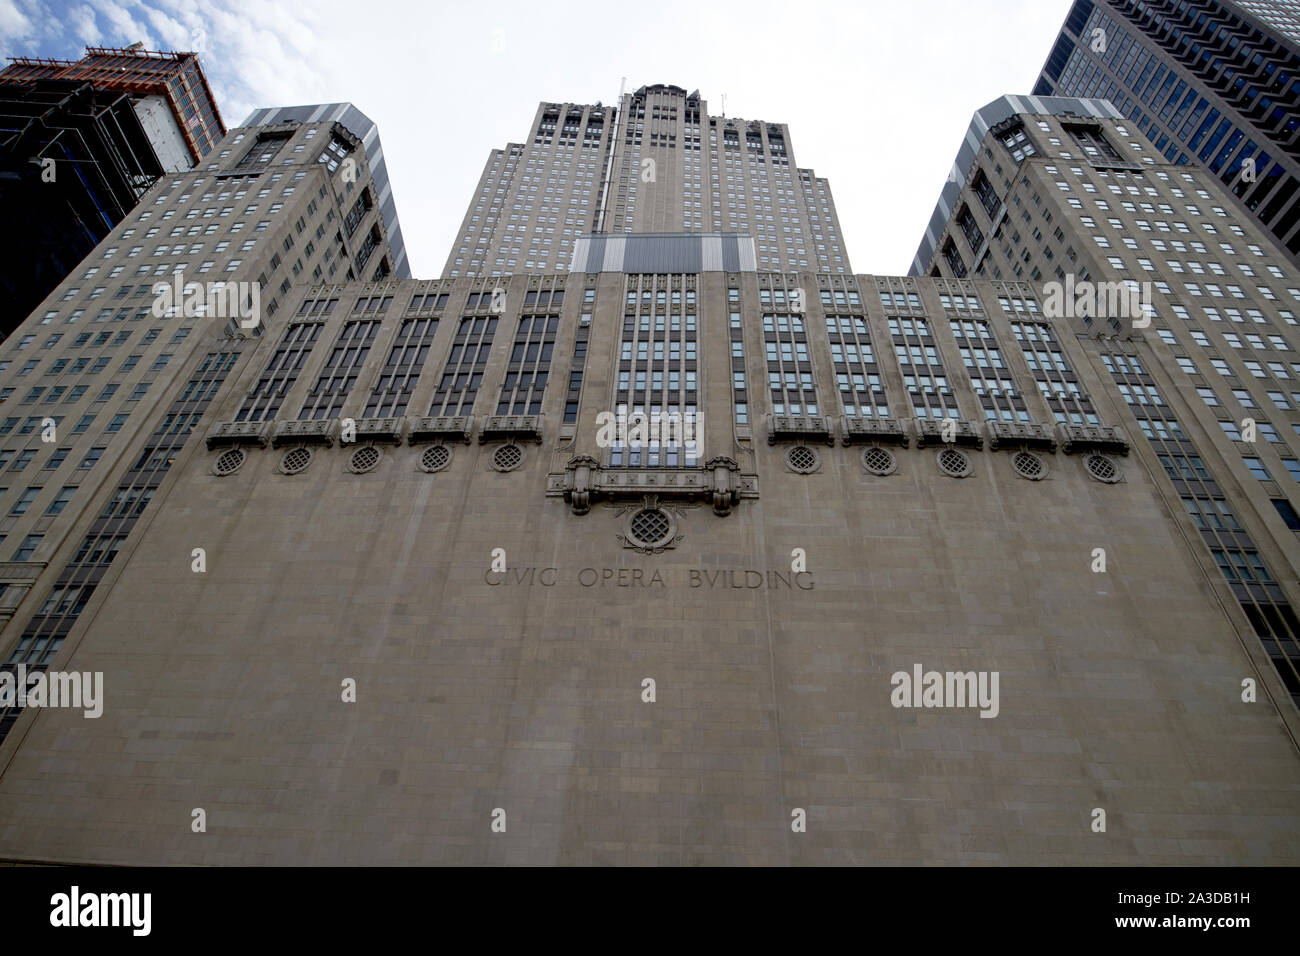 river facing side of the civic opera building chicago illinois united states of america Stock Photo